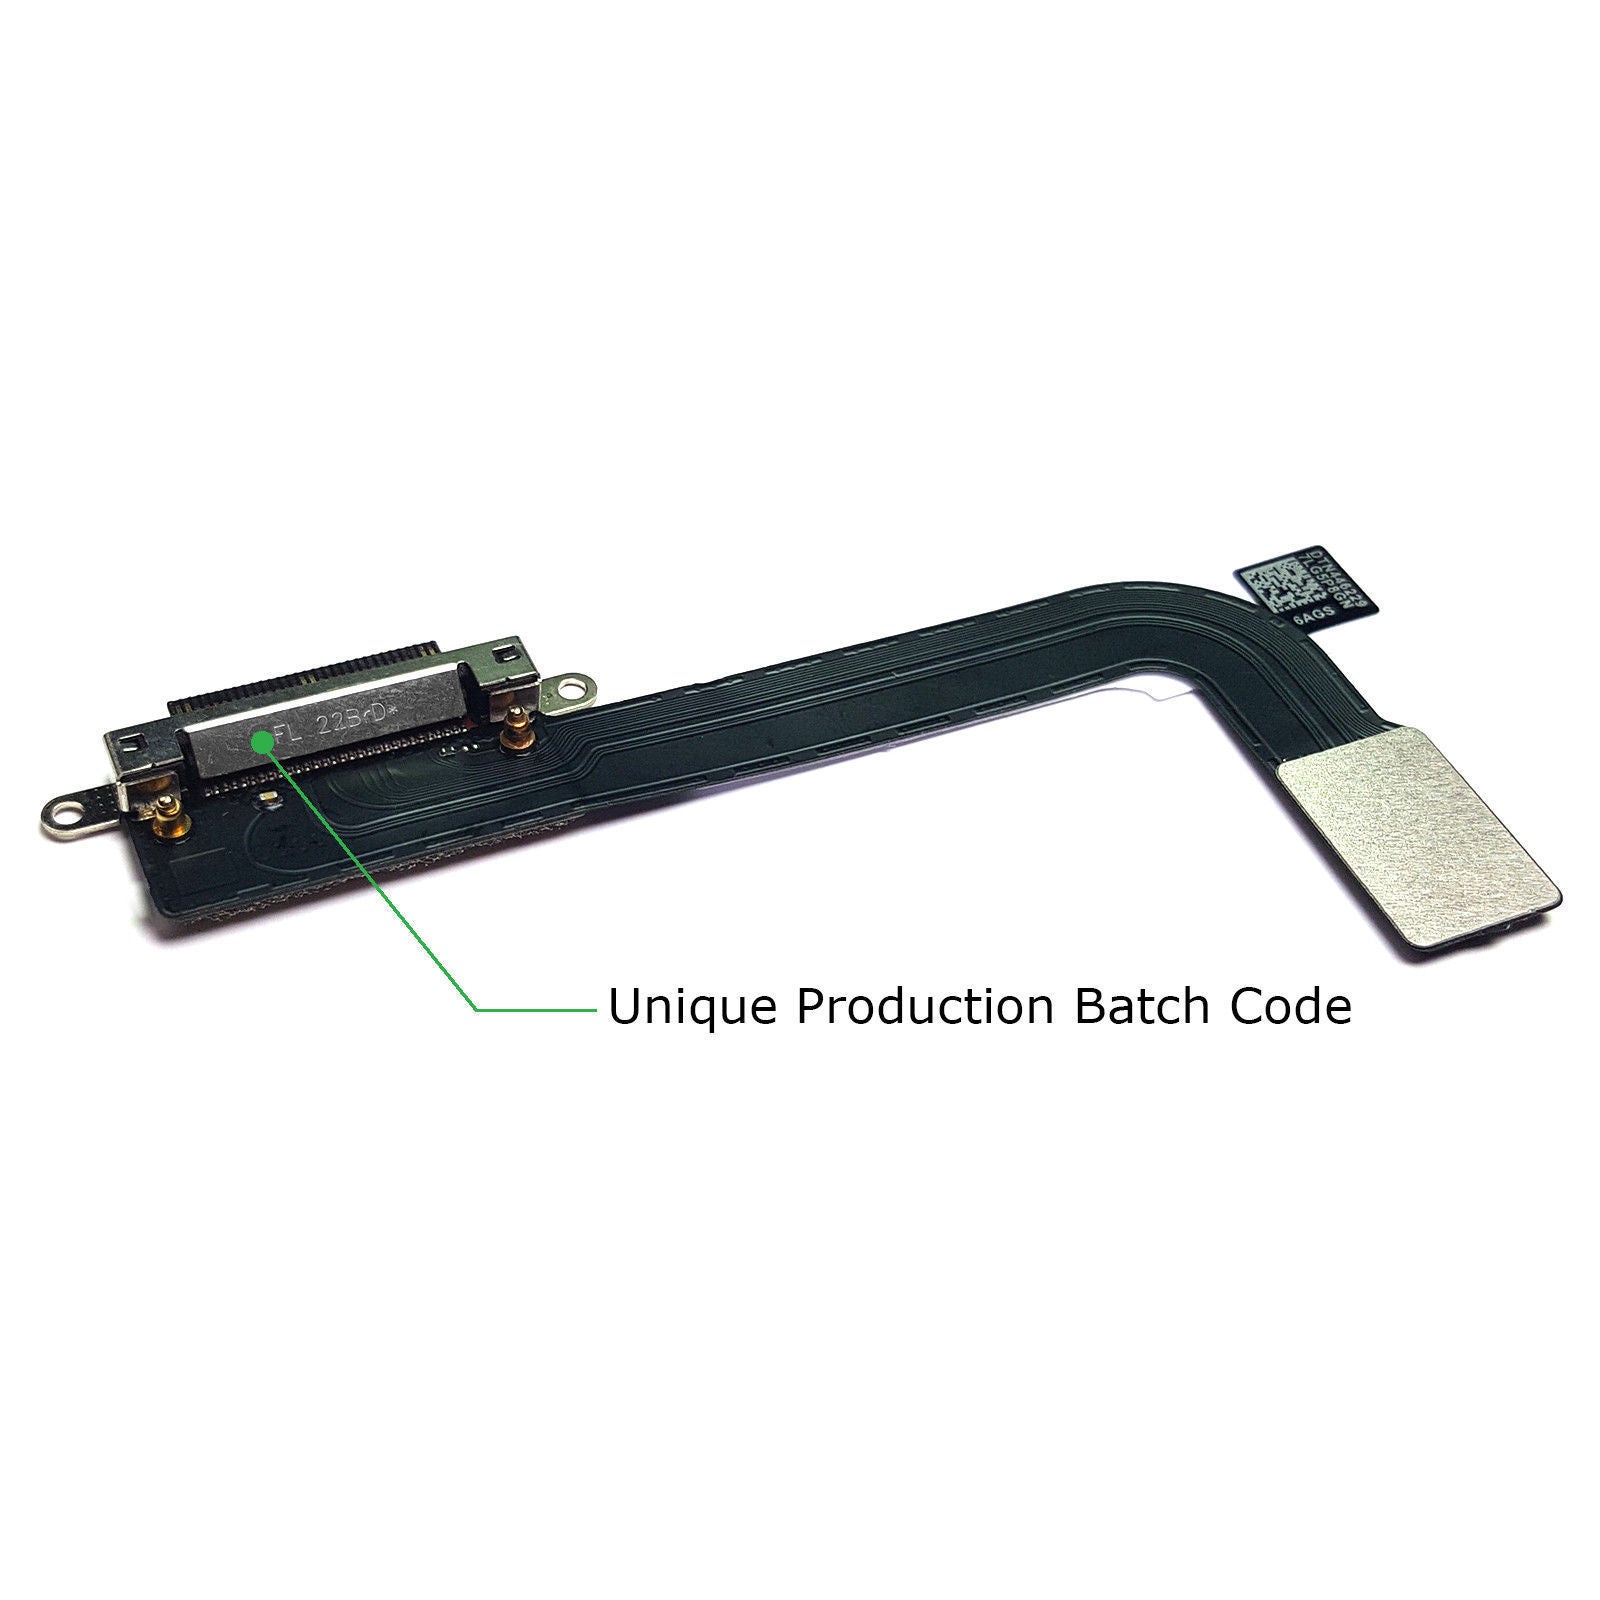 Apple iPad 3 Charging Port Flex Cable for [product_price] - First Help Tech